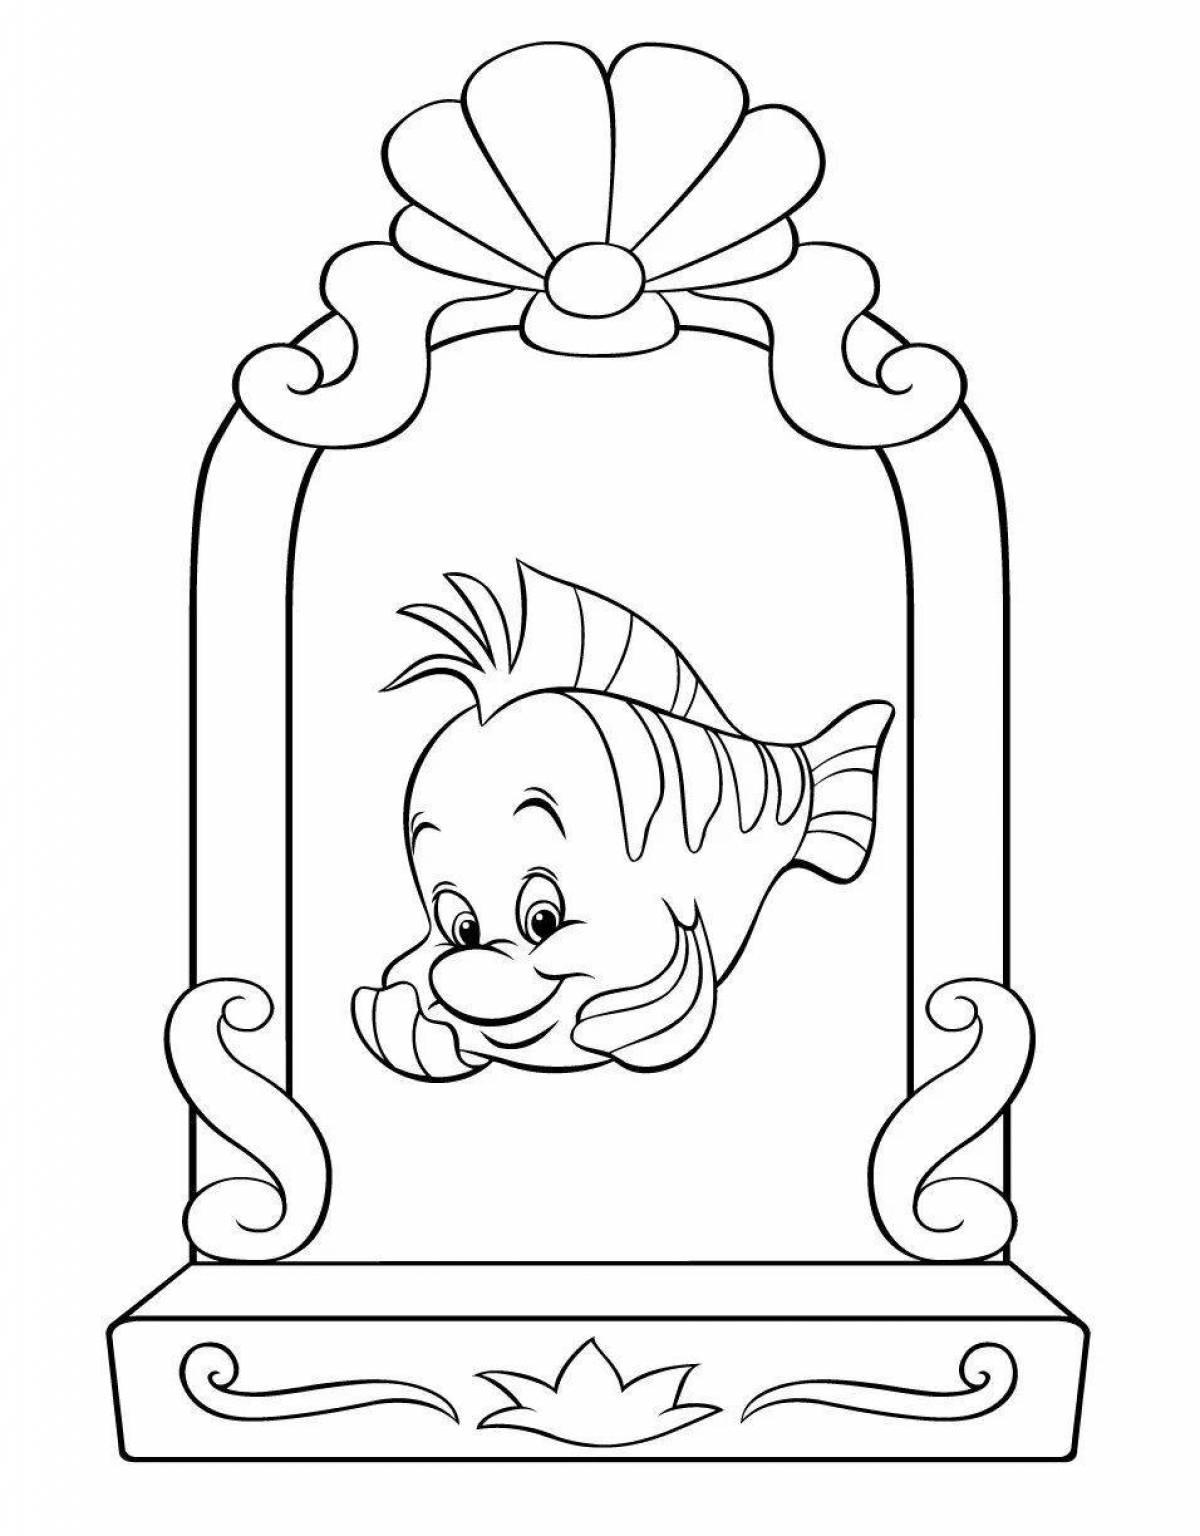 Color-vivid floater coloring page